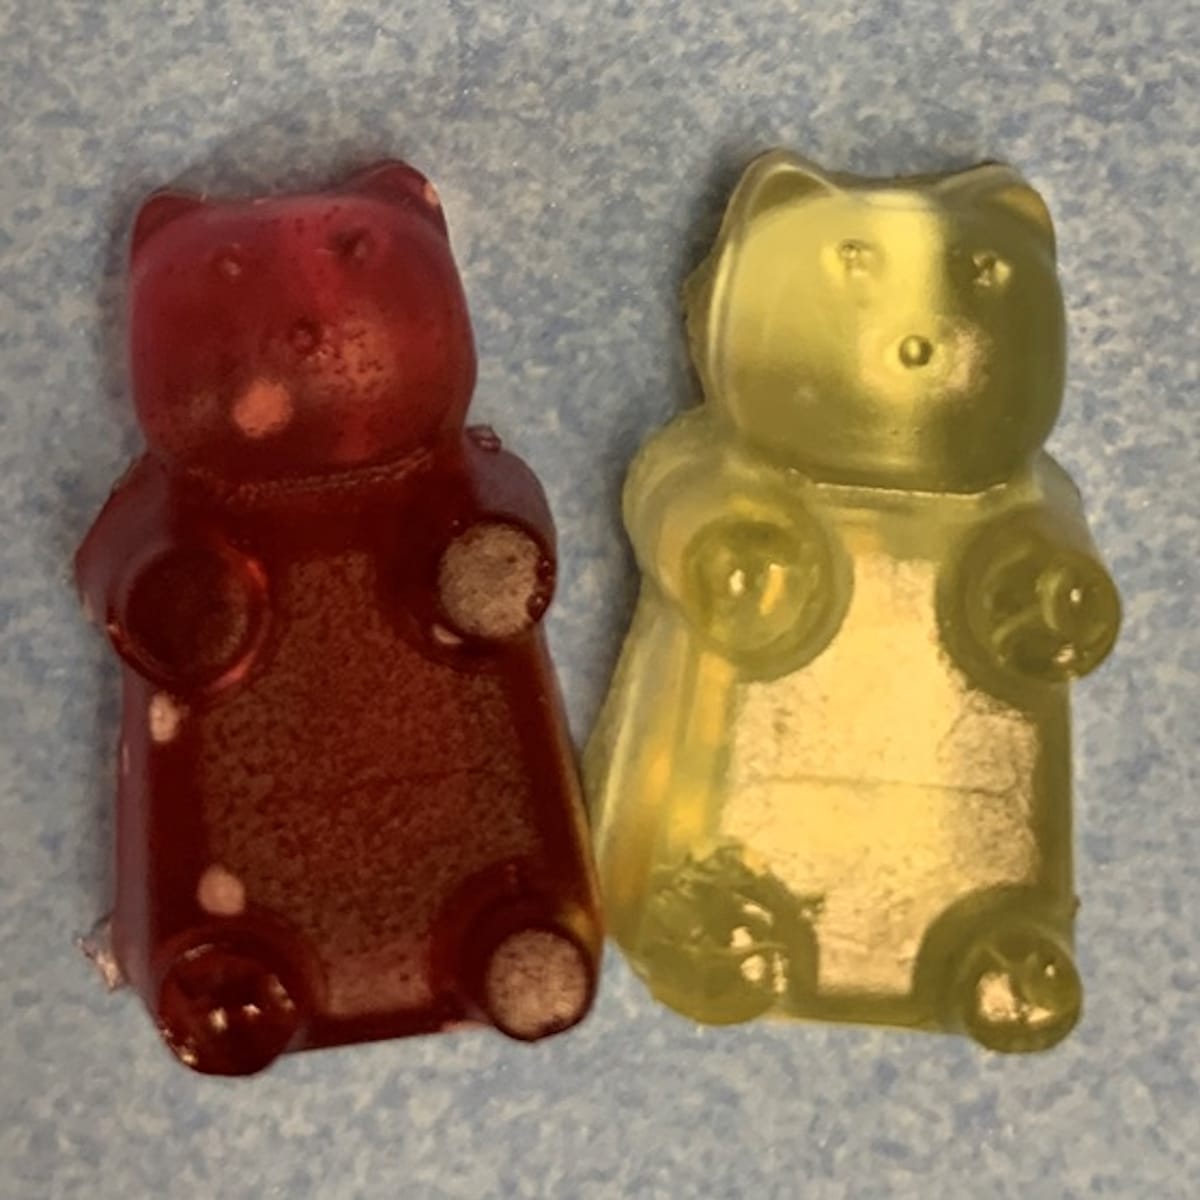 A composite resin suitable for making wind turbine blades could be recycled into a variety of products, including these gummy bears.